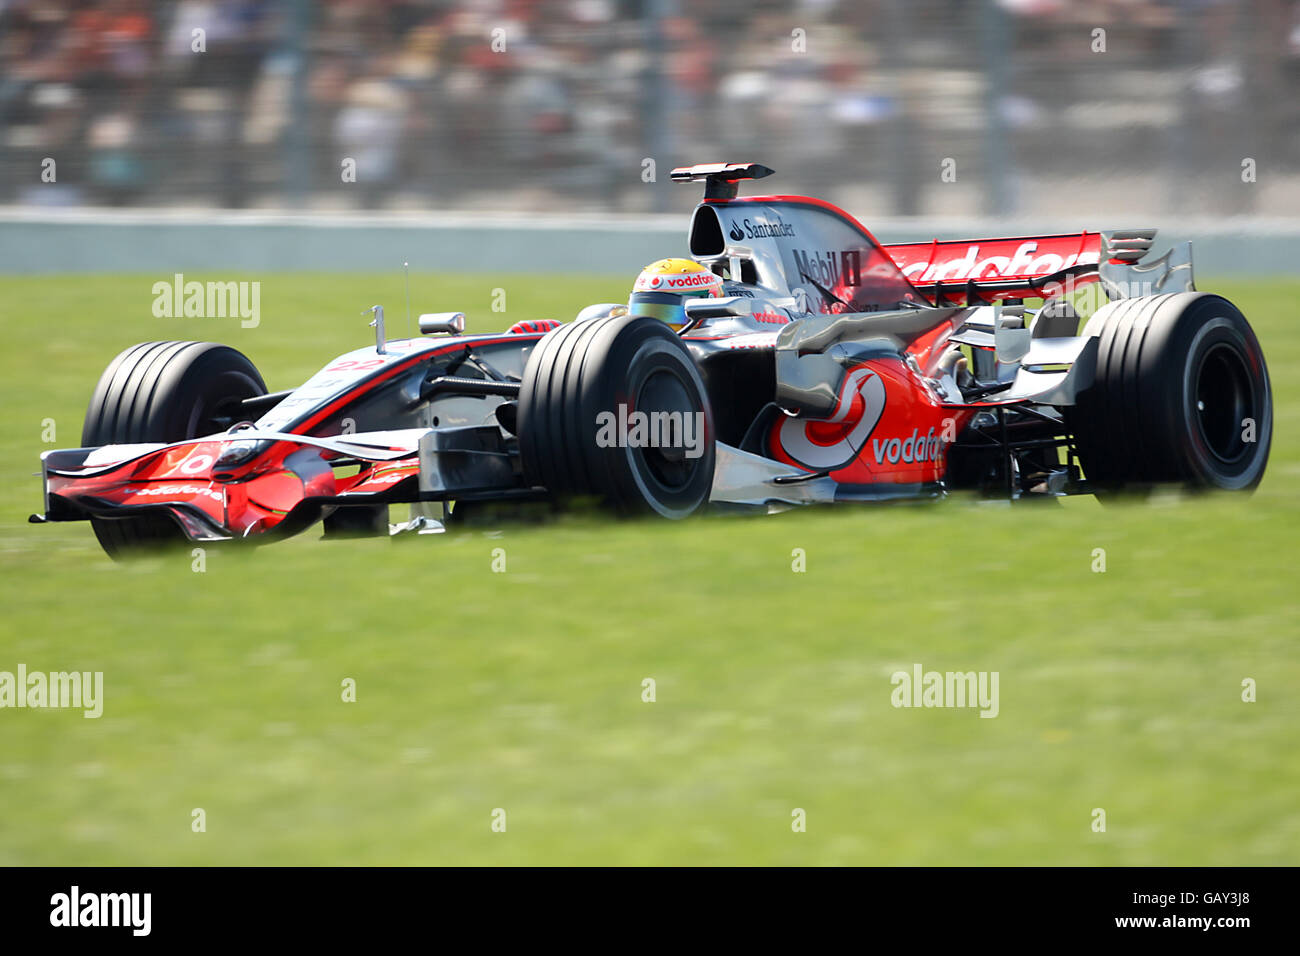 McLaren Mercedes' Lewis Hamilton during qualifying for the Grand Prix at Magny-Cours, Nevers, France. Stock Photo